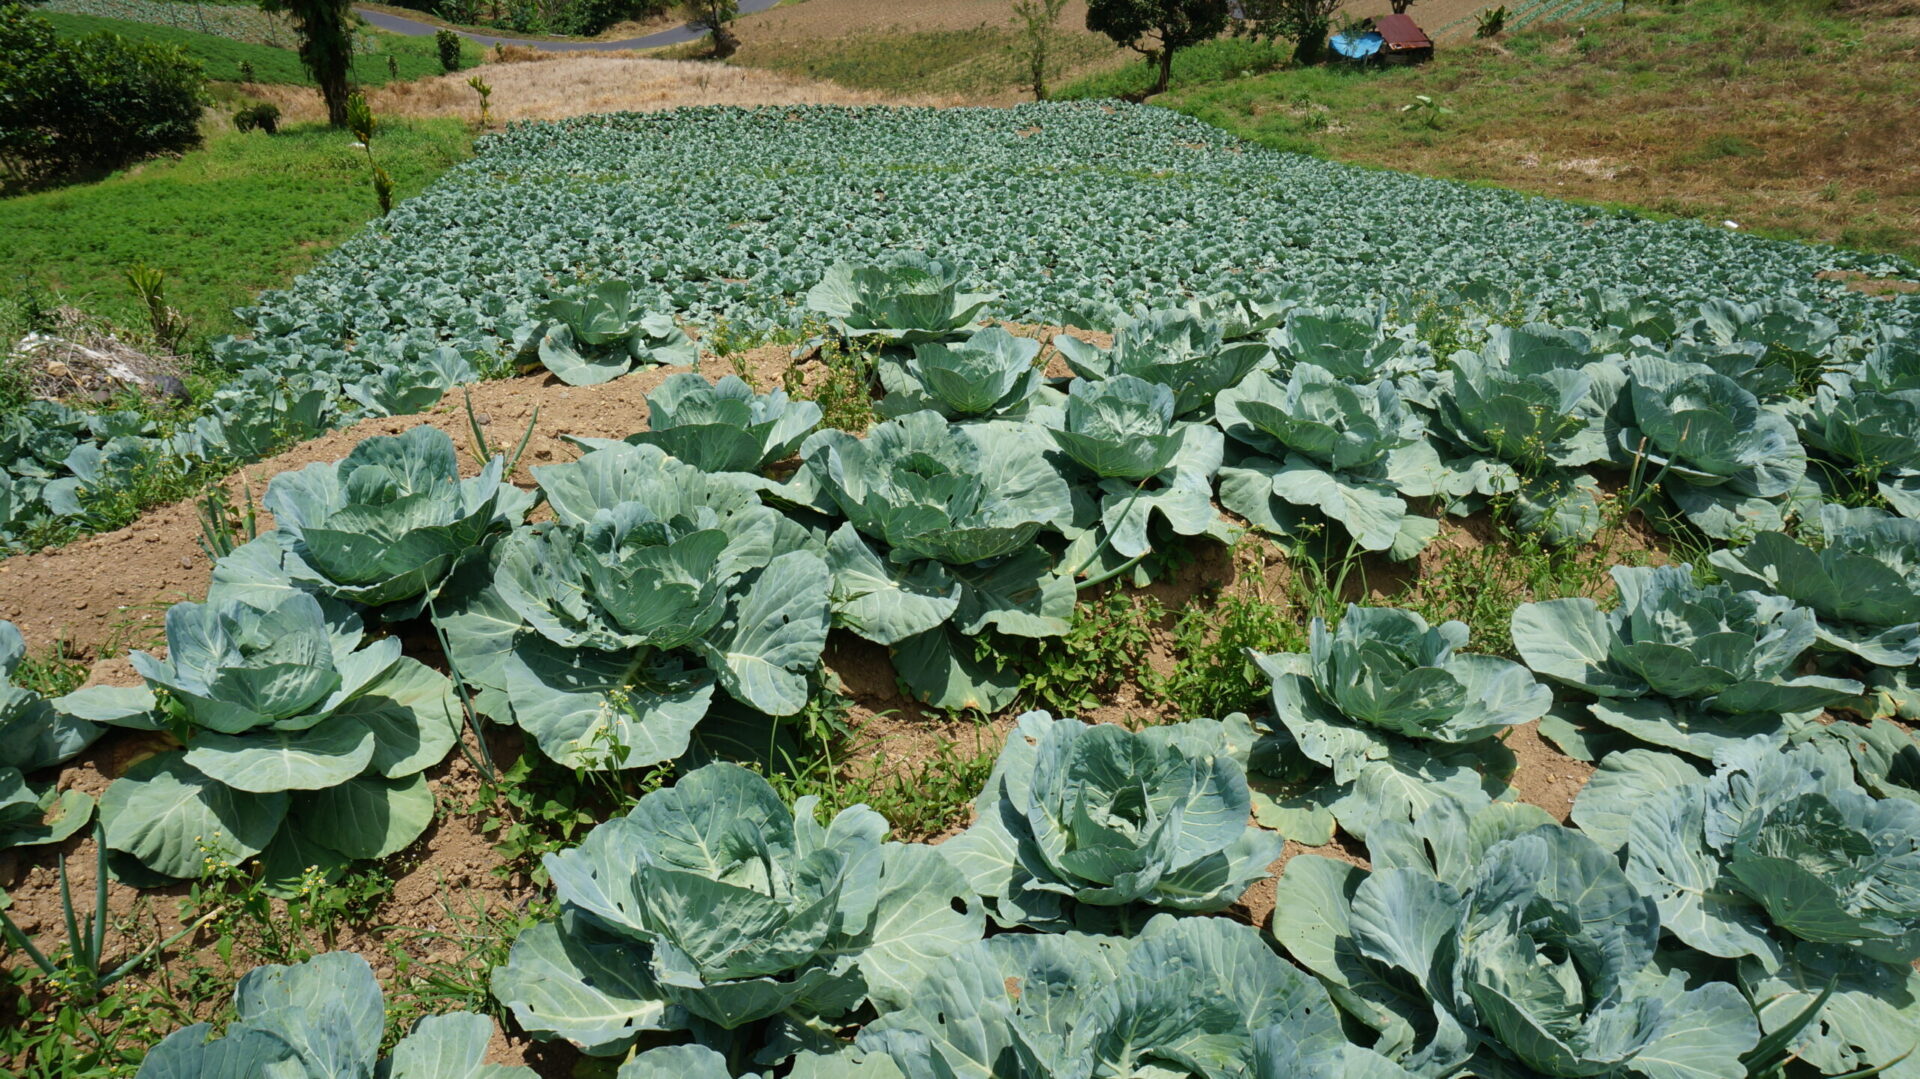 A cabbage patch in Mahawu, North Sulawesi